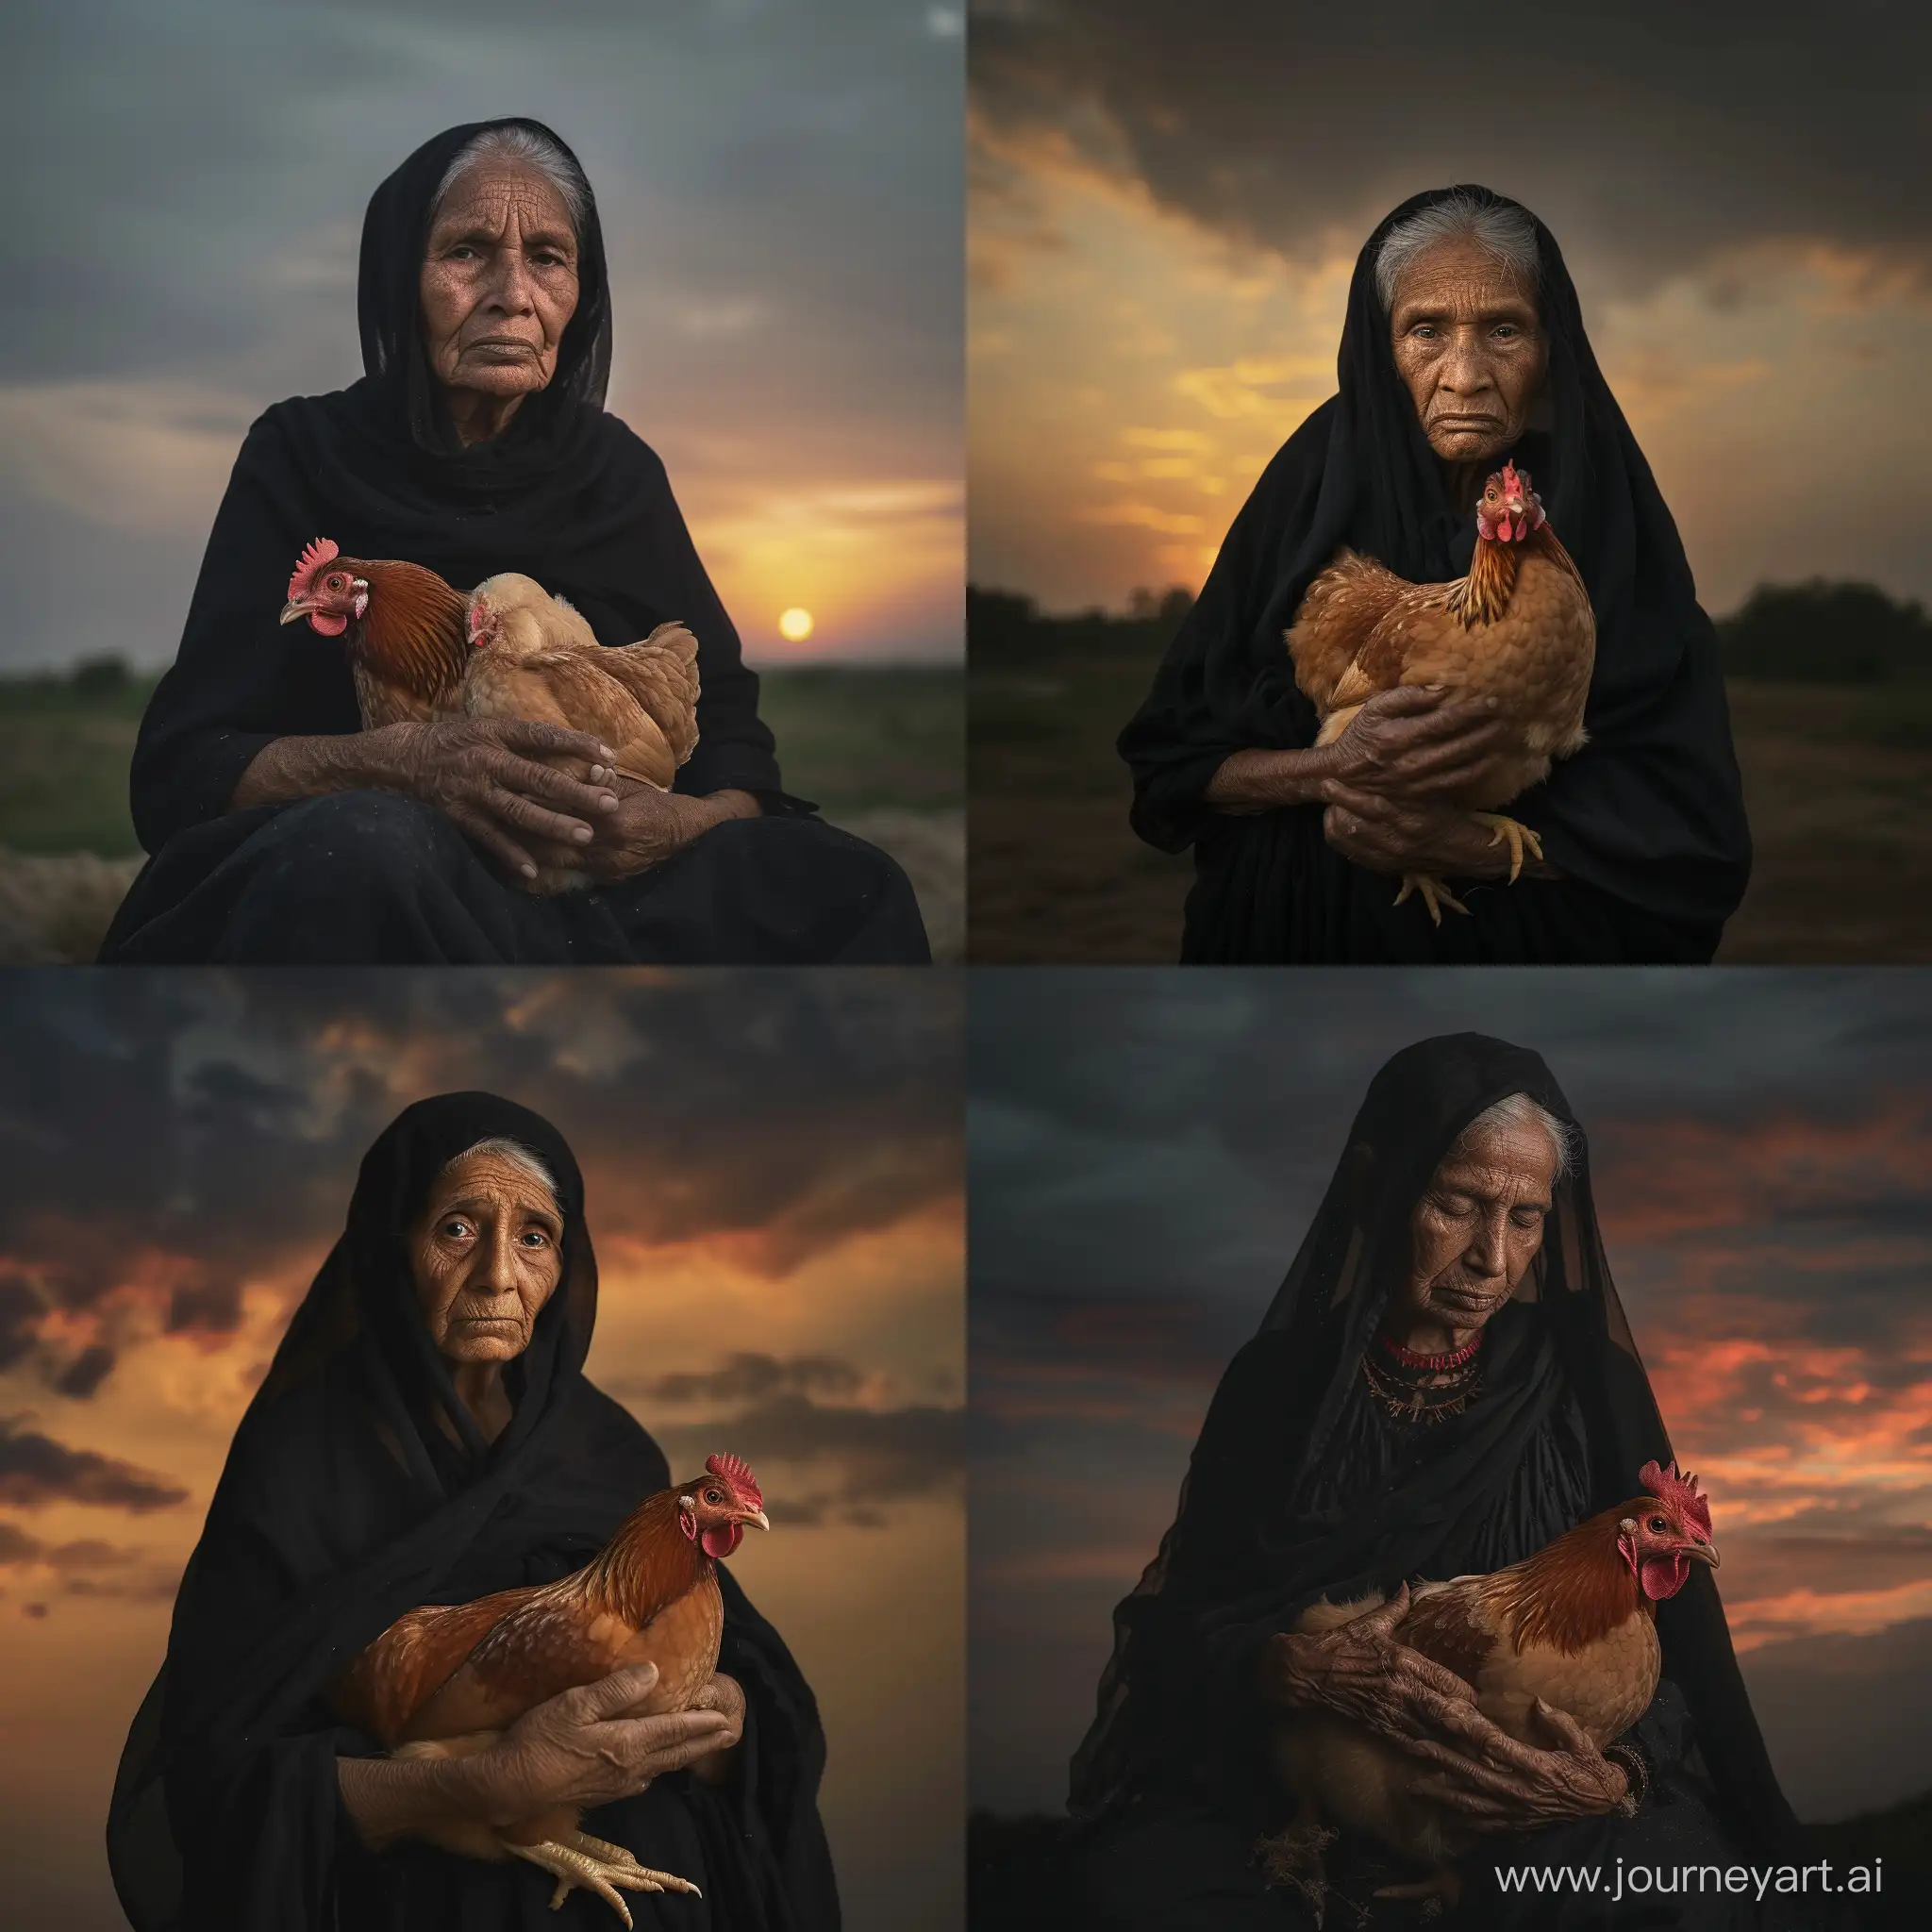 Elderly-Indian-Woman-in-Traditional-Attire-Holding-Chickens-at-Sunset